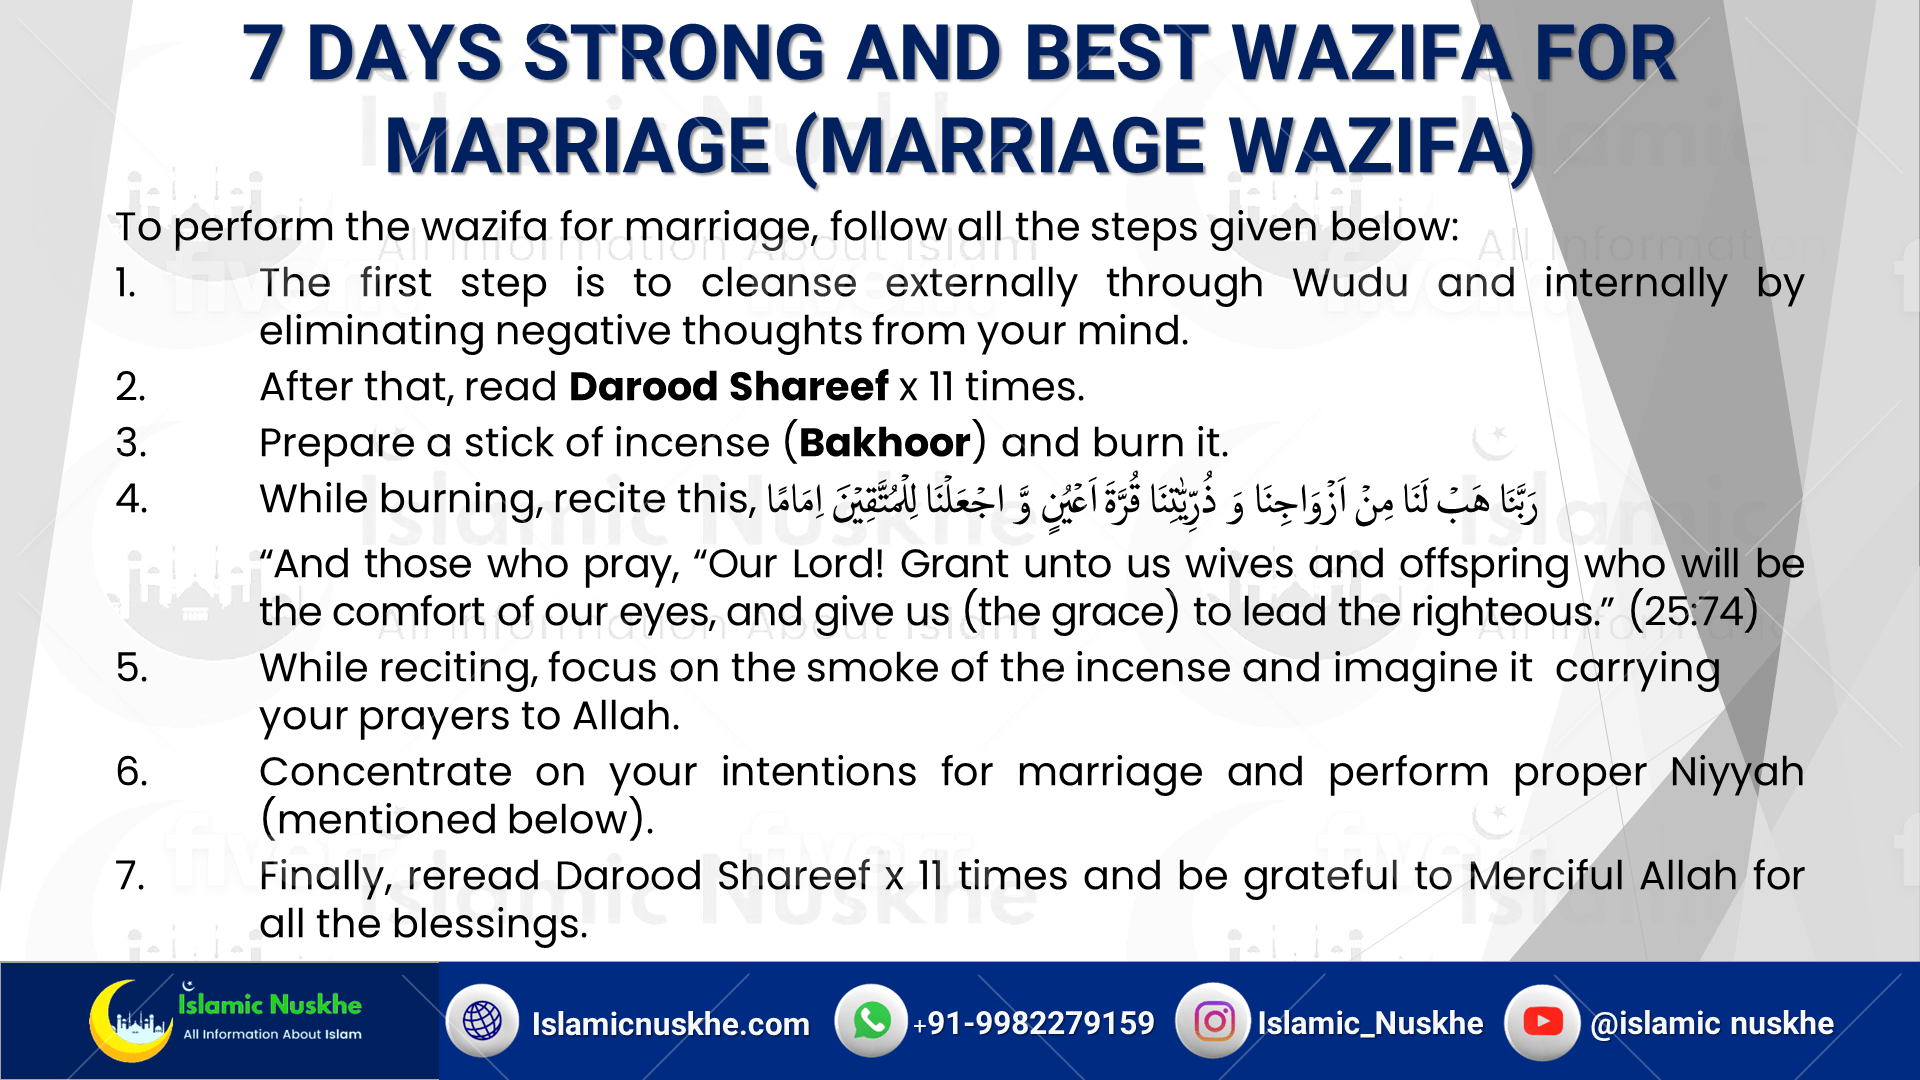 7 Days Strong And Best Wazifa For Marriage (Marriage Wazifa)